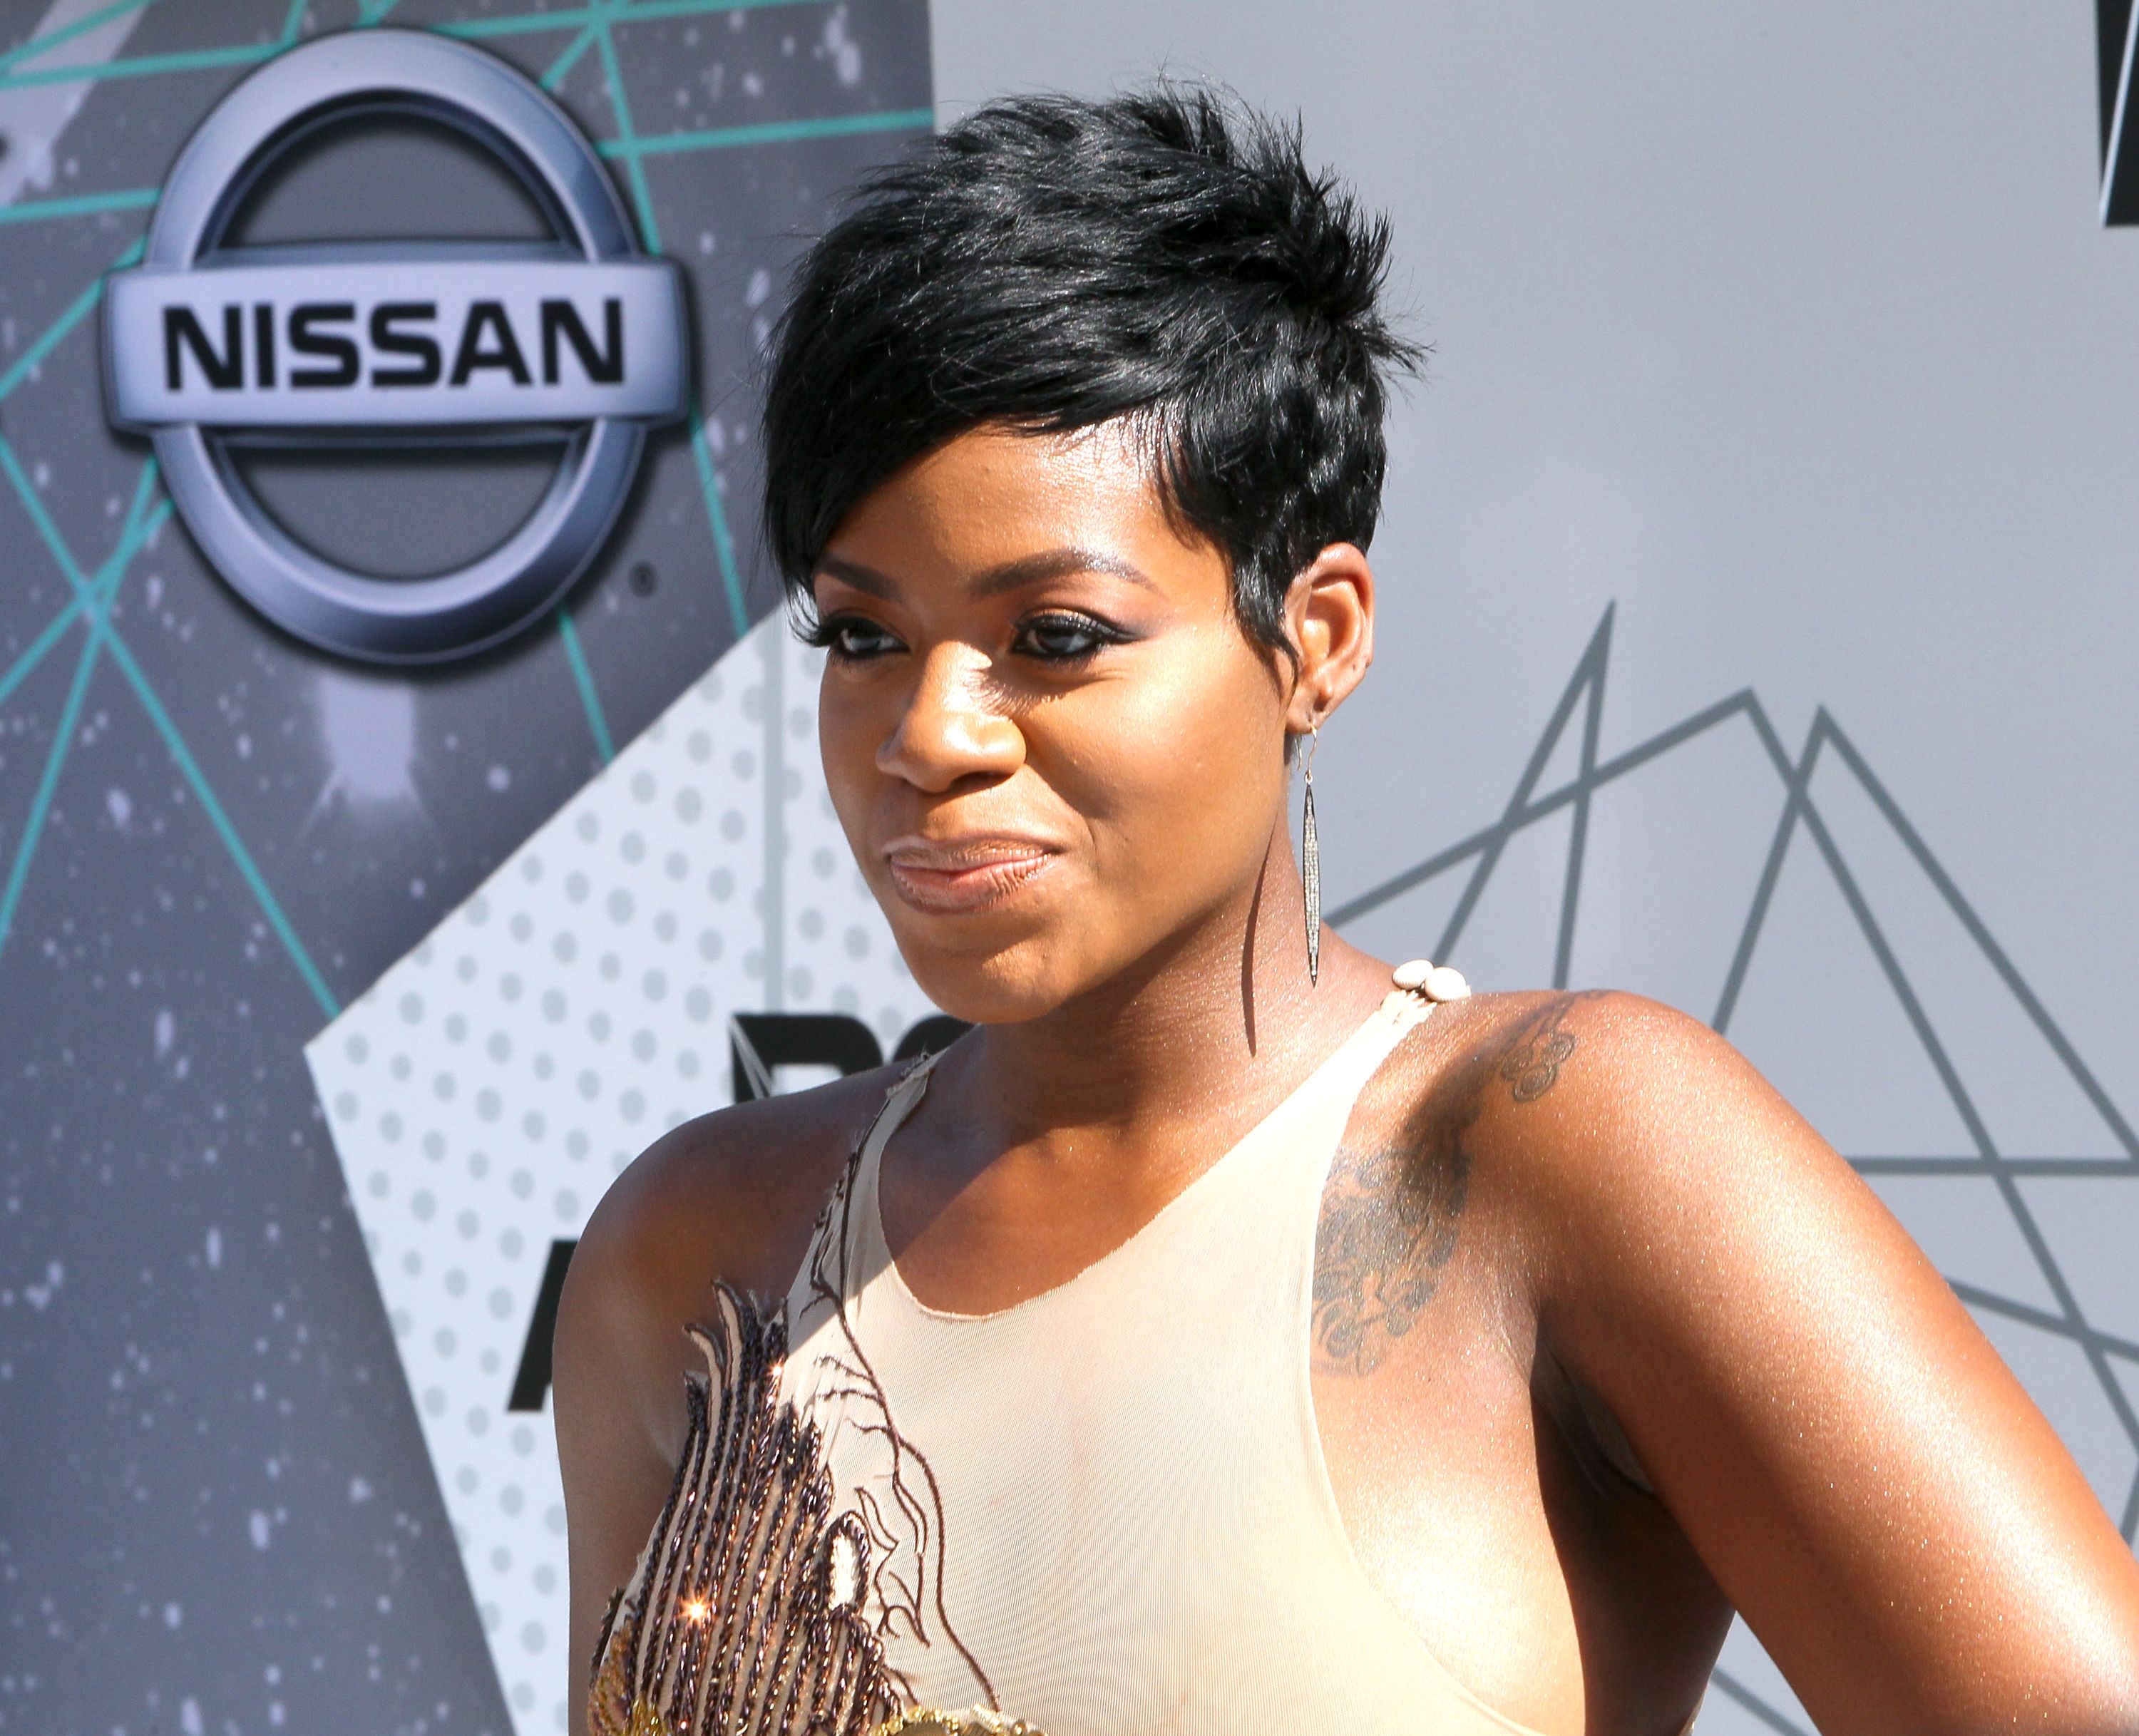 Singer Fantasia Barrino attends the 2016 BET Awards at Microsoft Theater on June 26, 2016. | Source: Getty Images